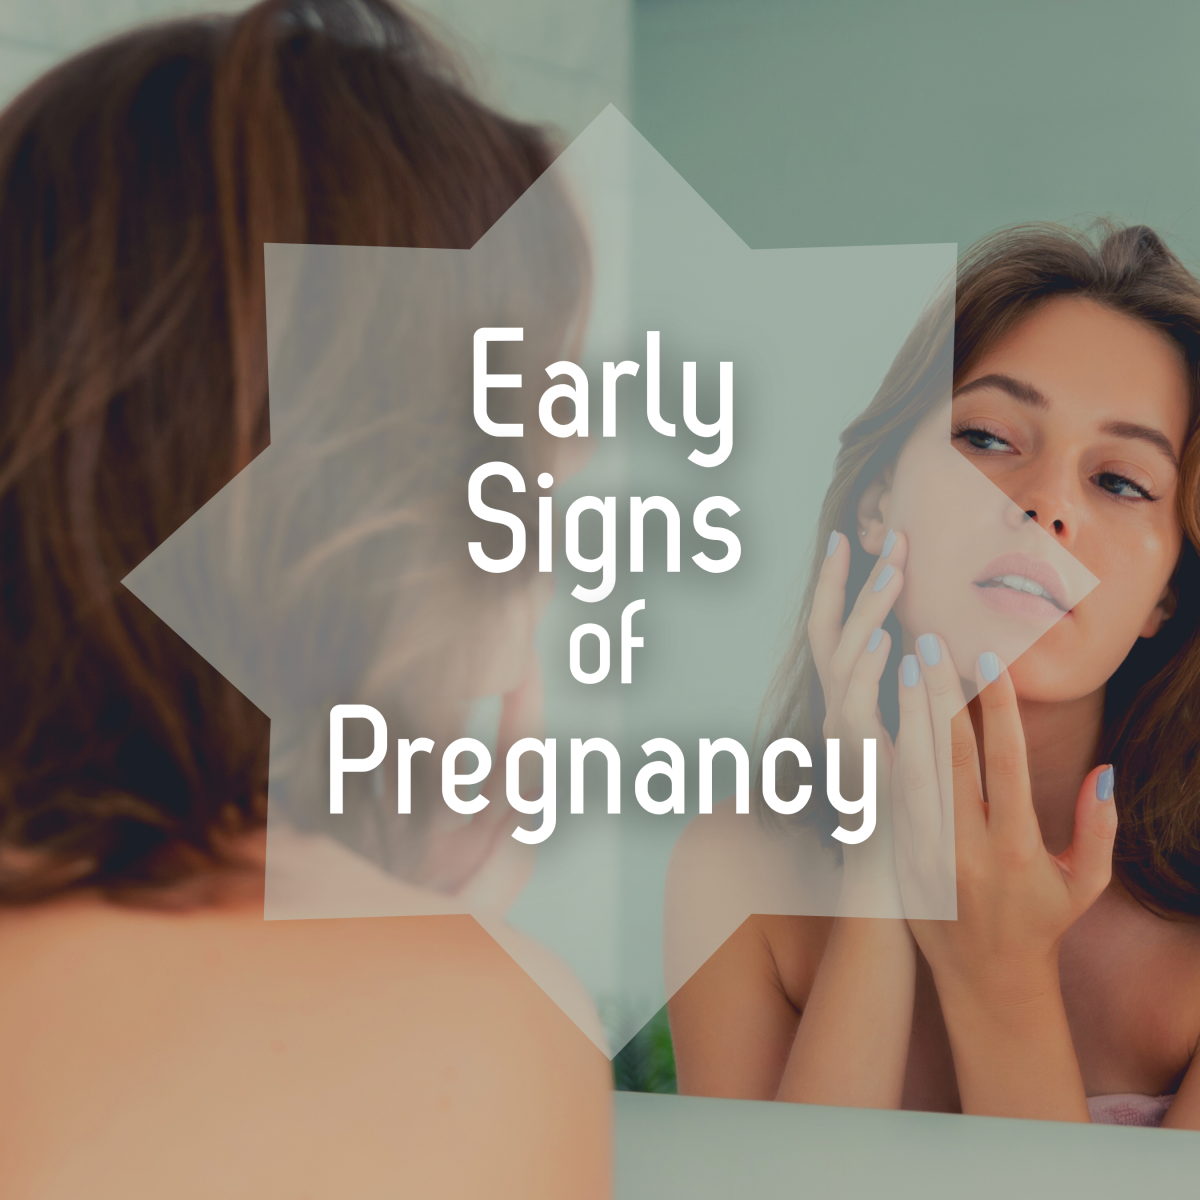 The Two Early Signs I Had of Pregnancy